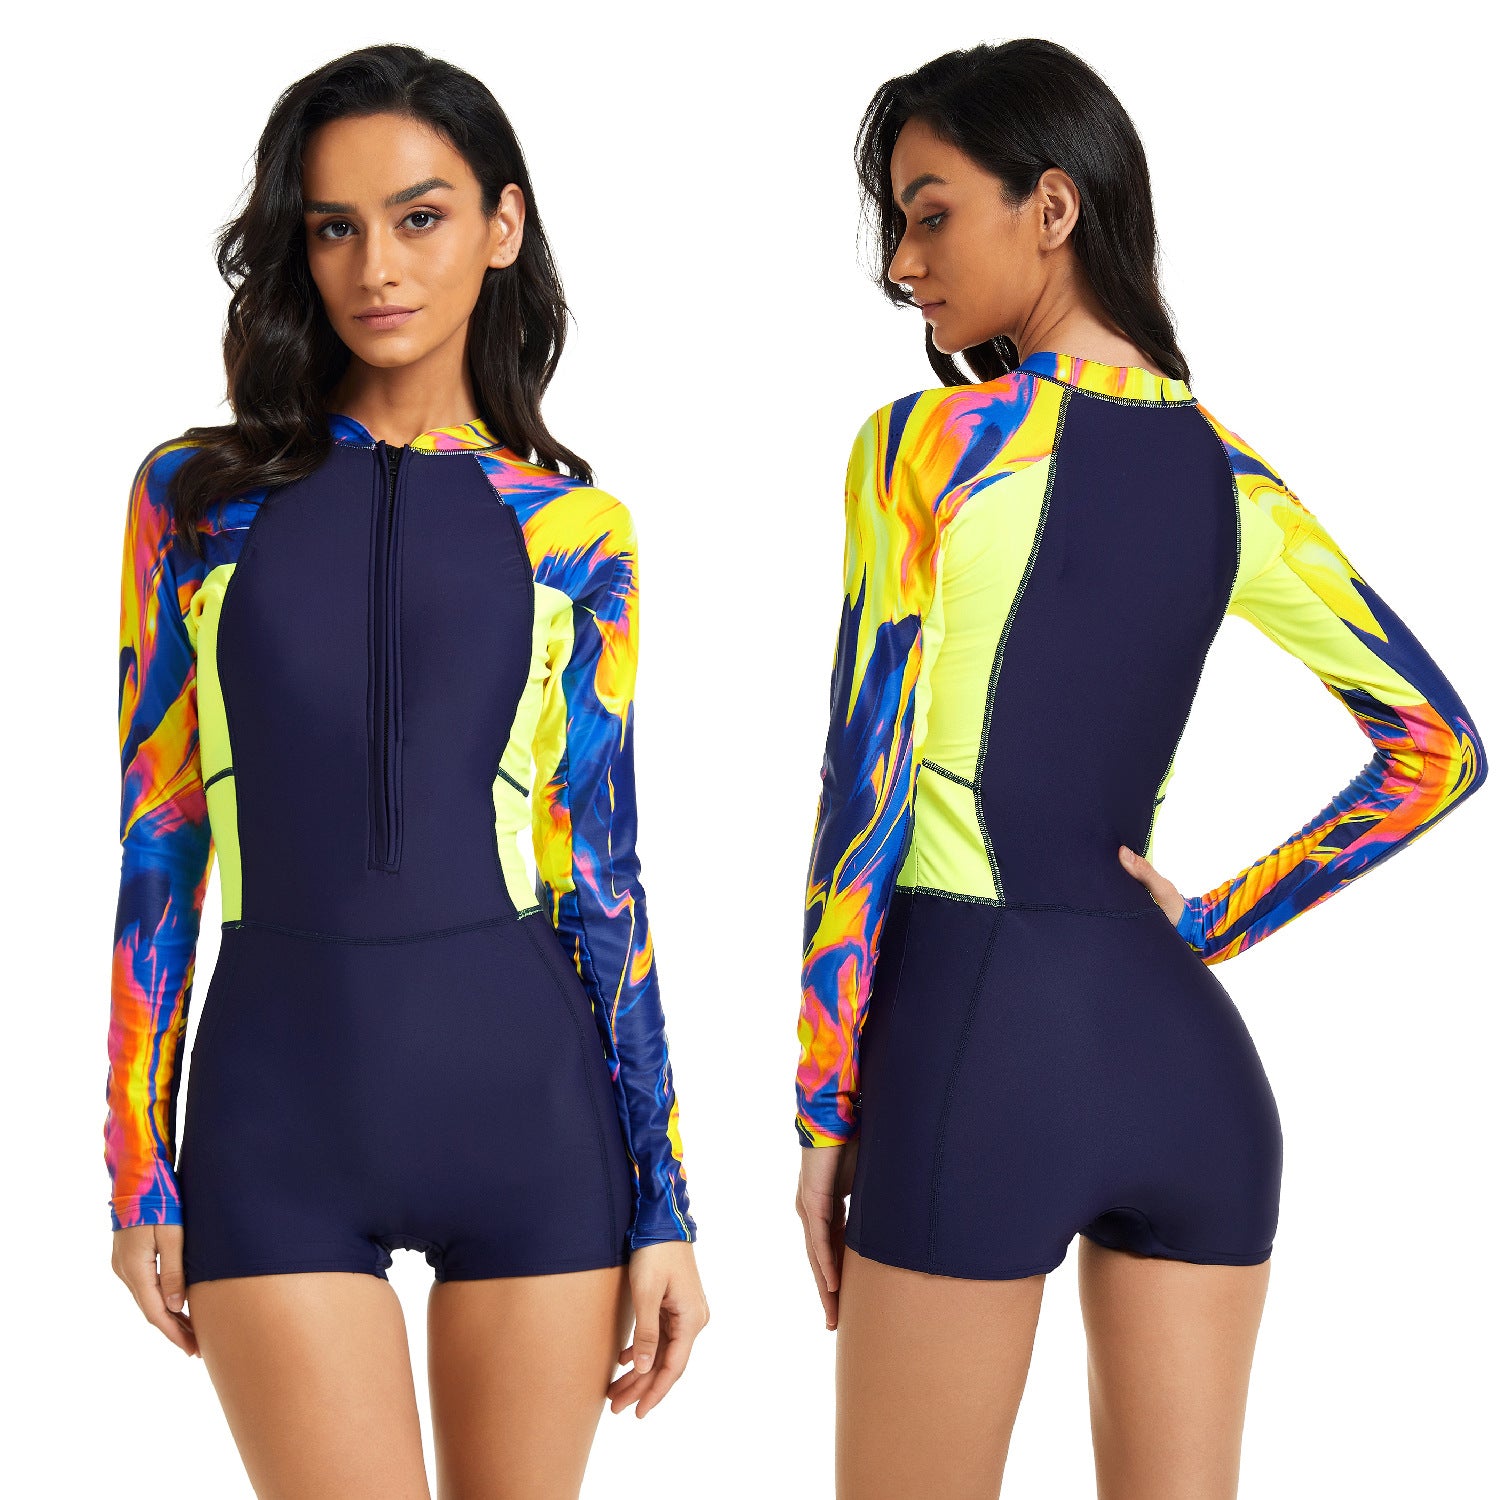 One-Piece Long Sleeve Surfing Suit Sunscreen Women's Swimsuit Boxer Diving Suit Sexy Swimsuit